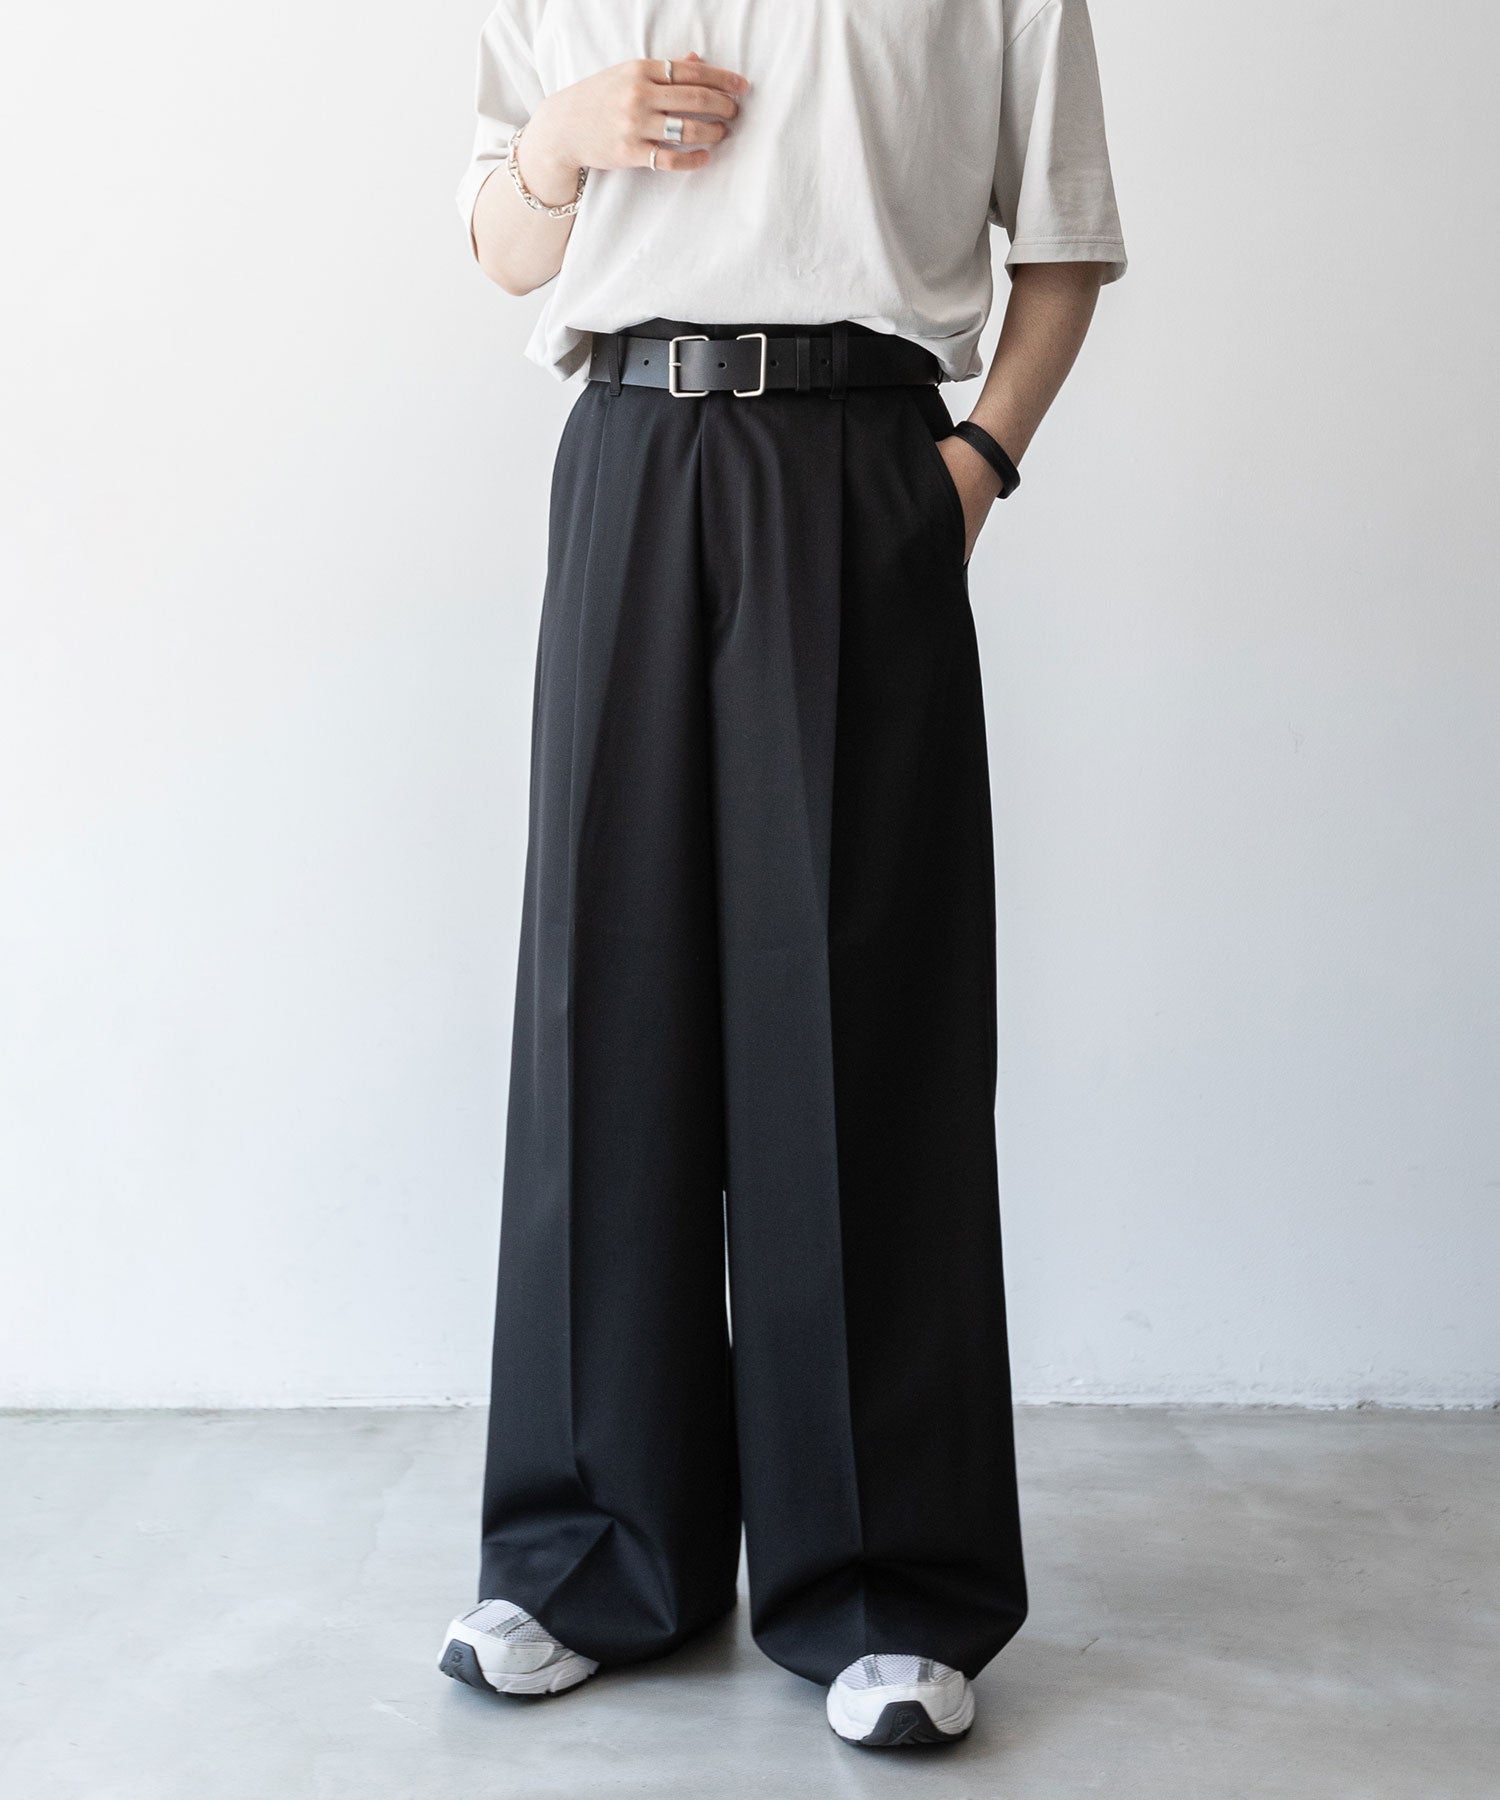 【stein】EXTRA WIDE TROUSERS シュタイン23aw sessionセッション福岡セレクトショップ 公式通販サイト